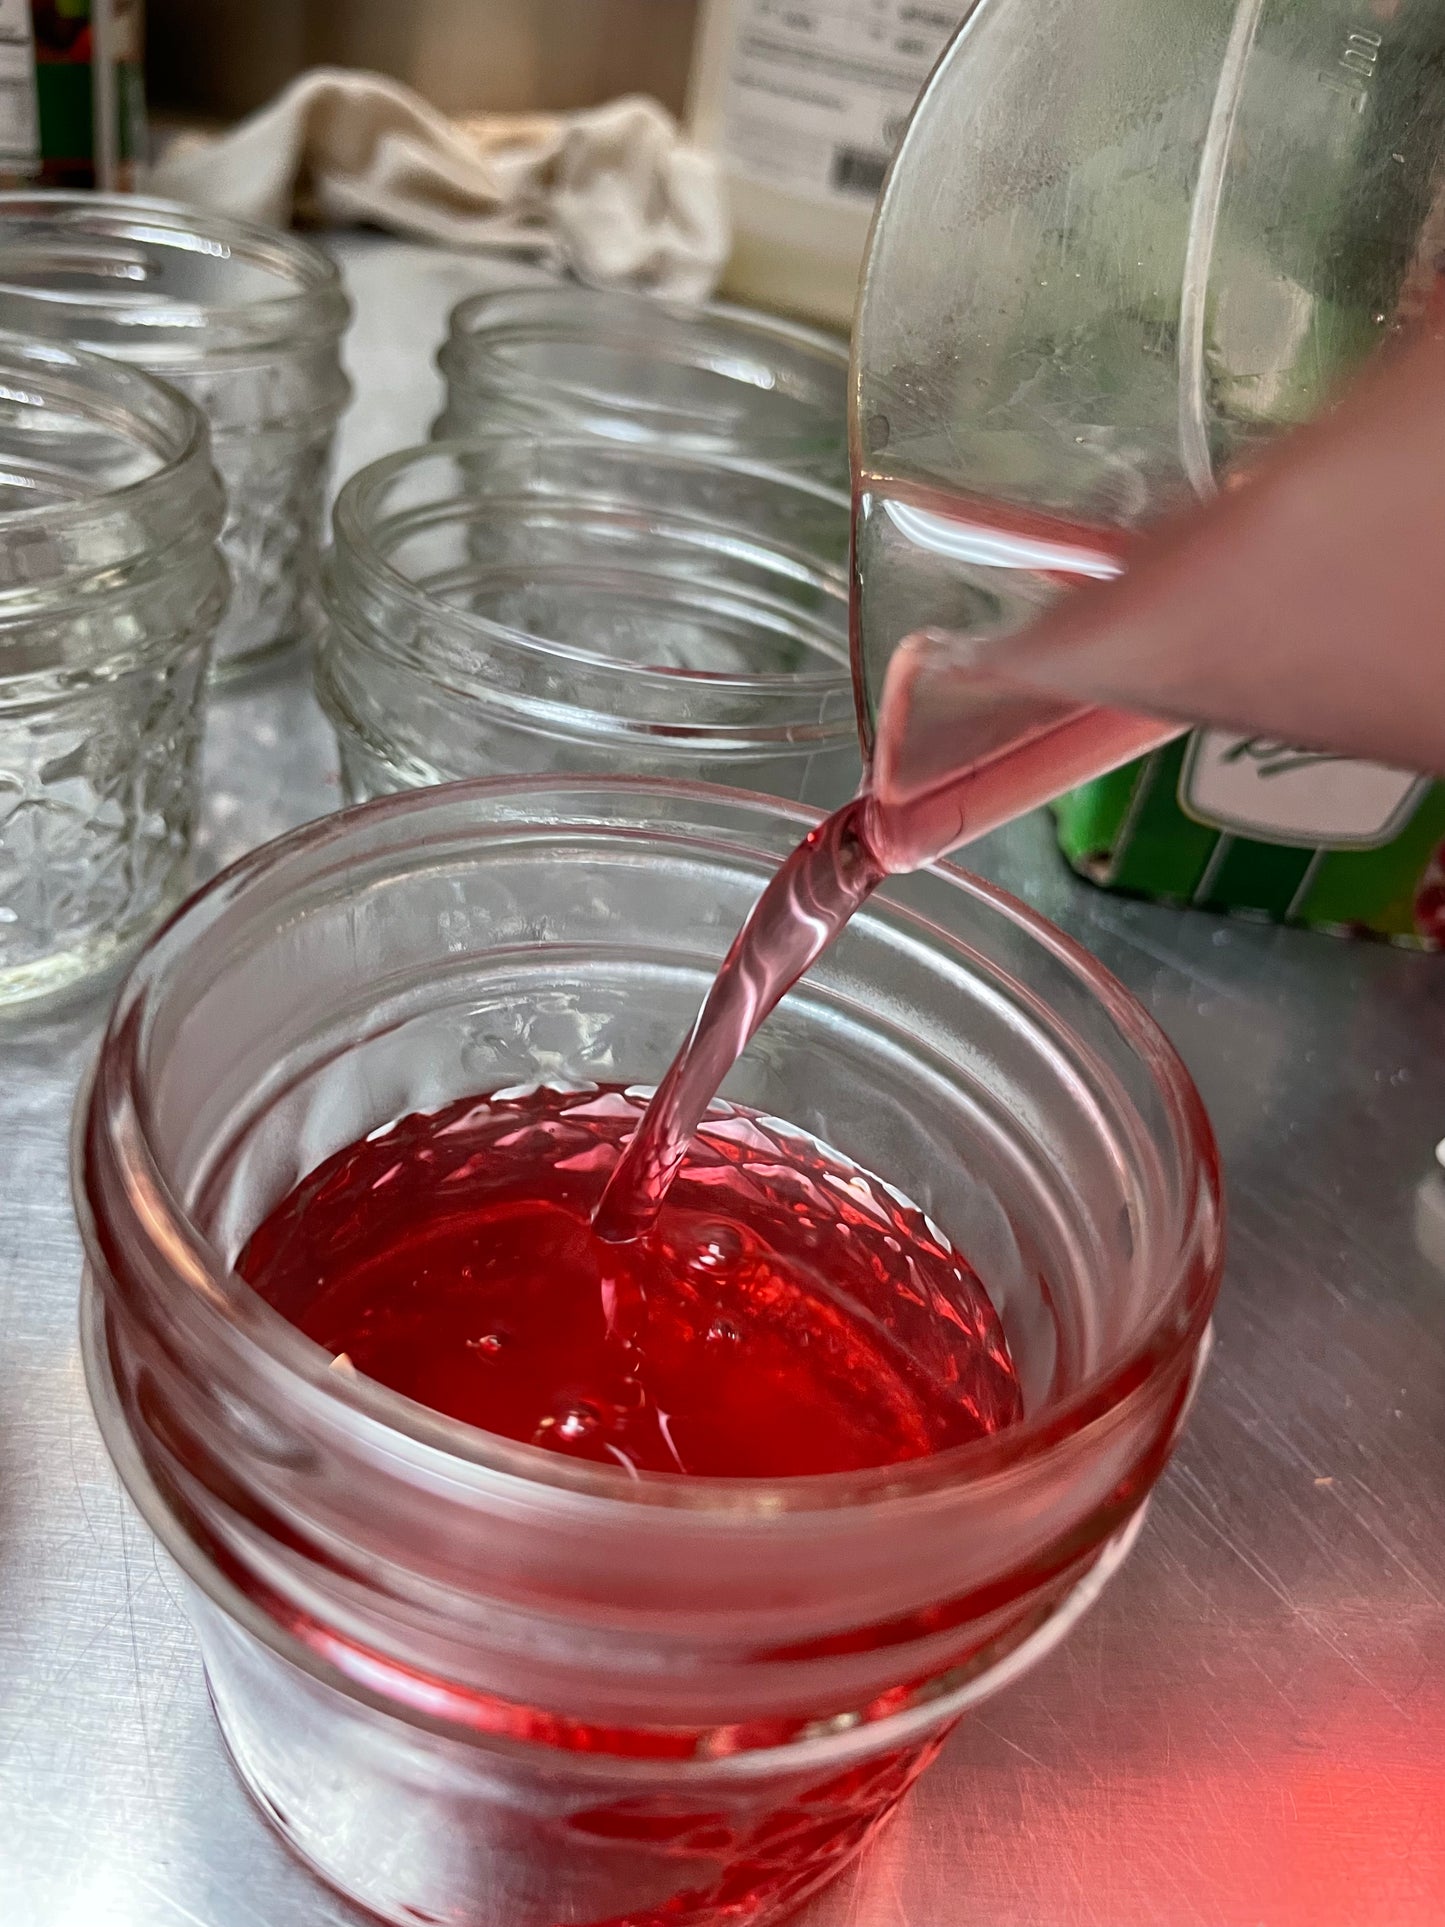 Fireweed Jelly